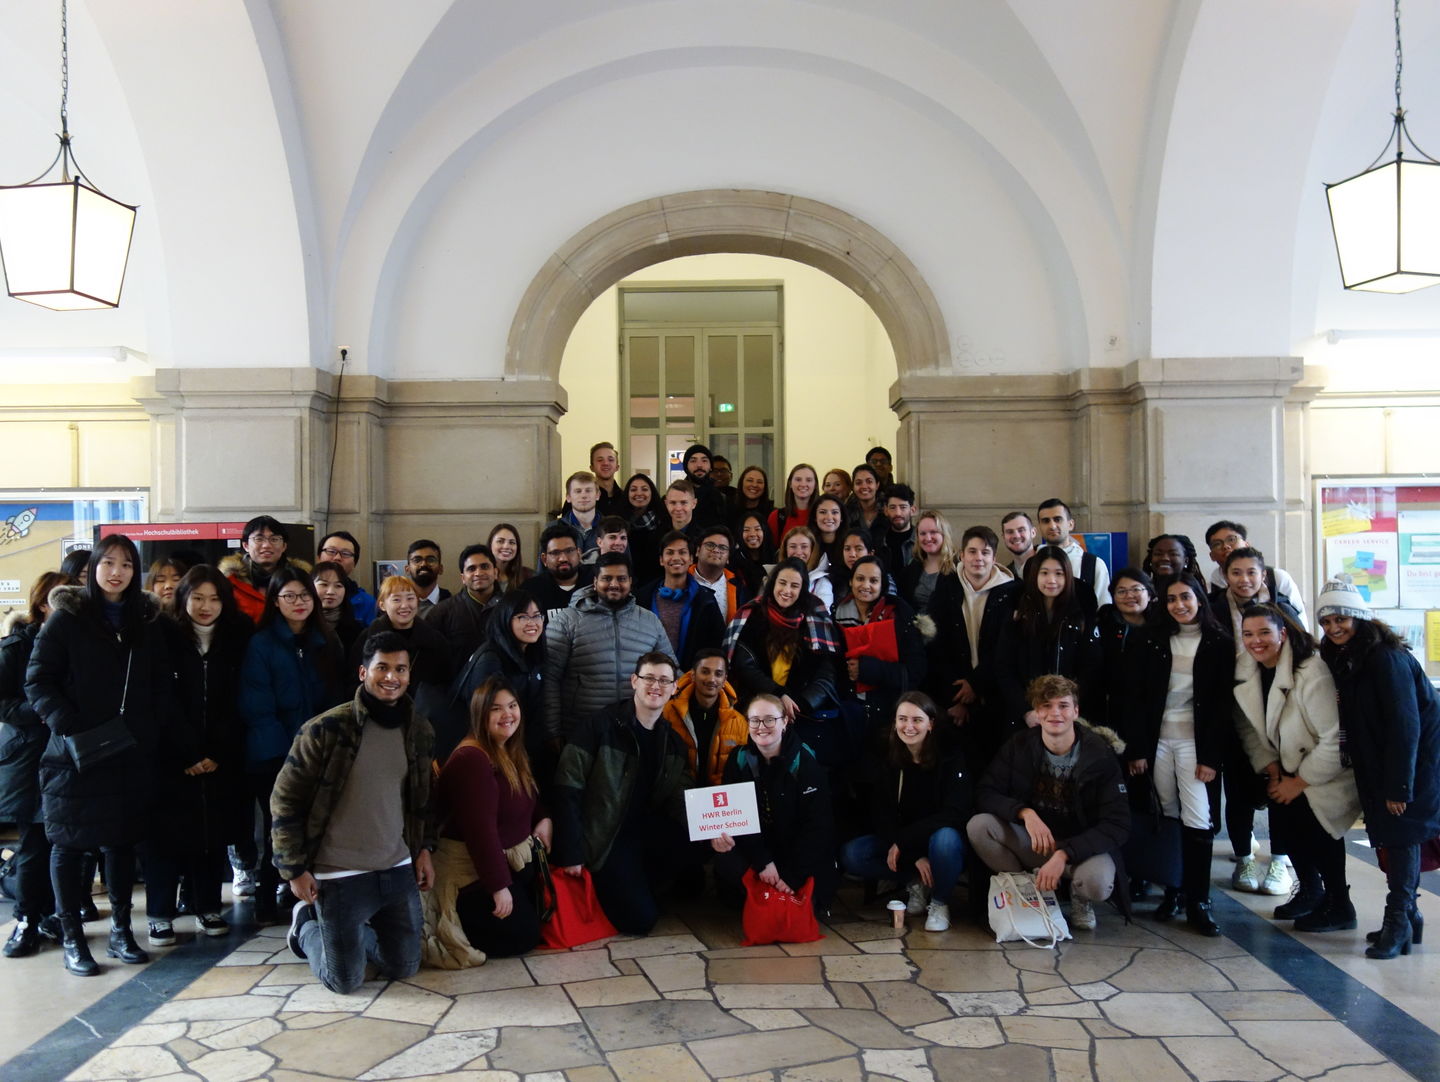 Participants of the Winter School 2020 in the foyer of house B at the Schöneberg campus of the HWR Berlin.